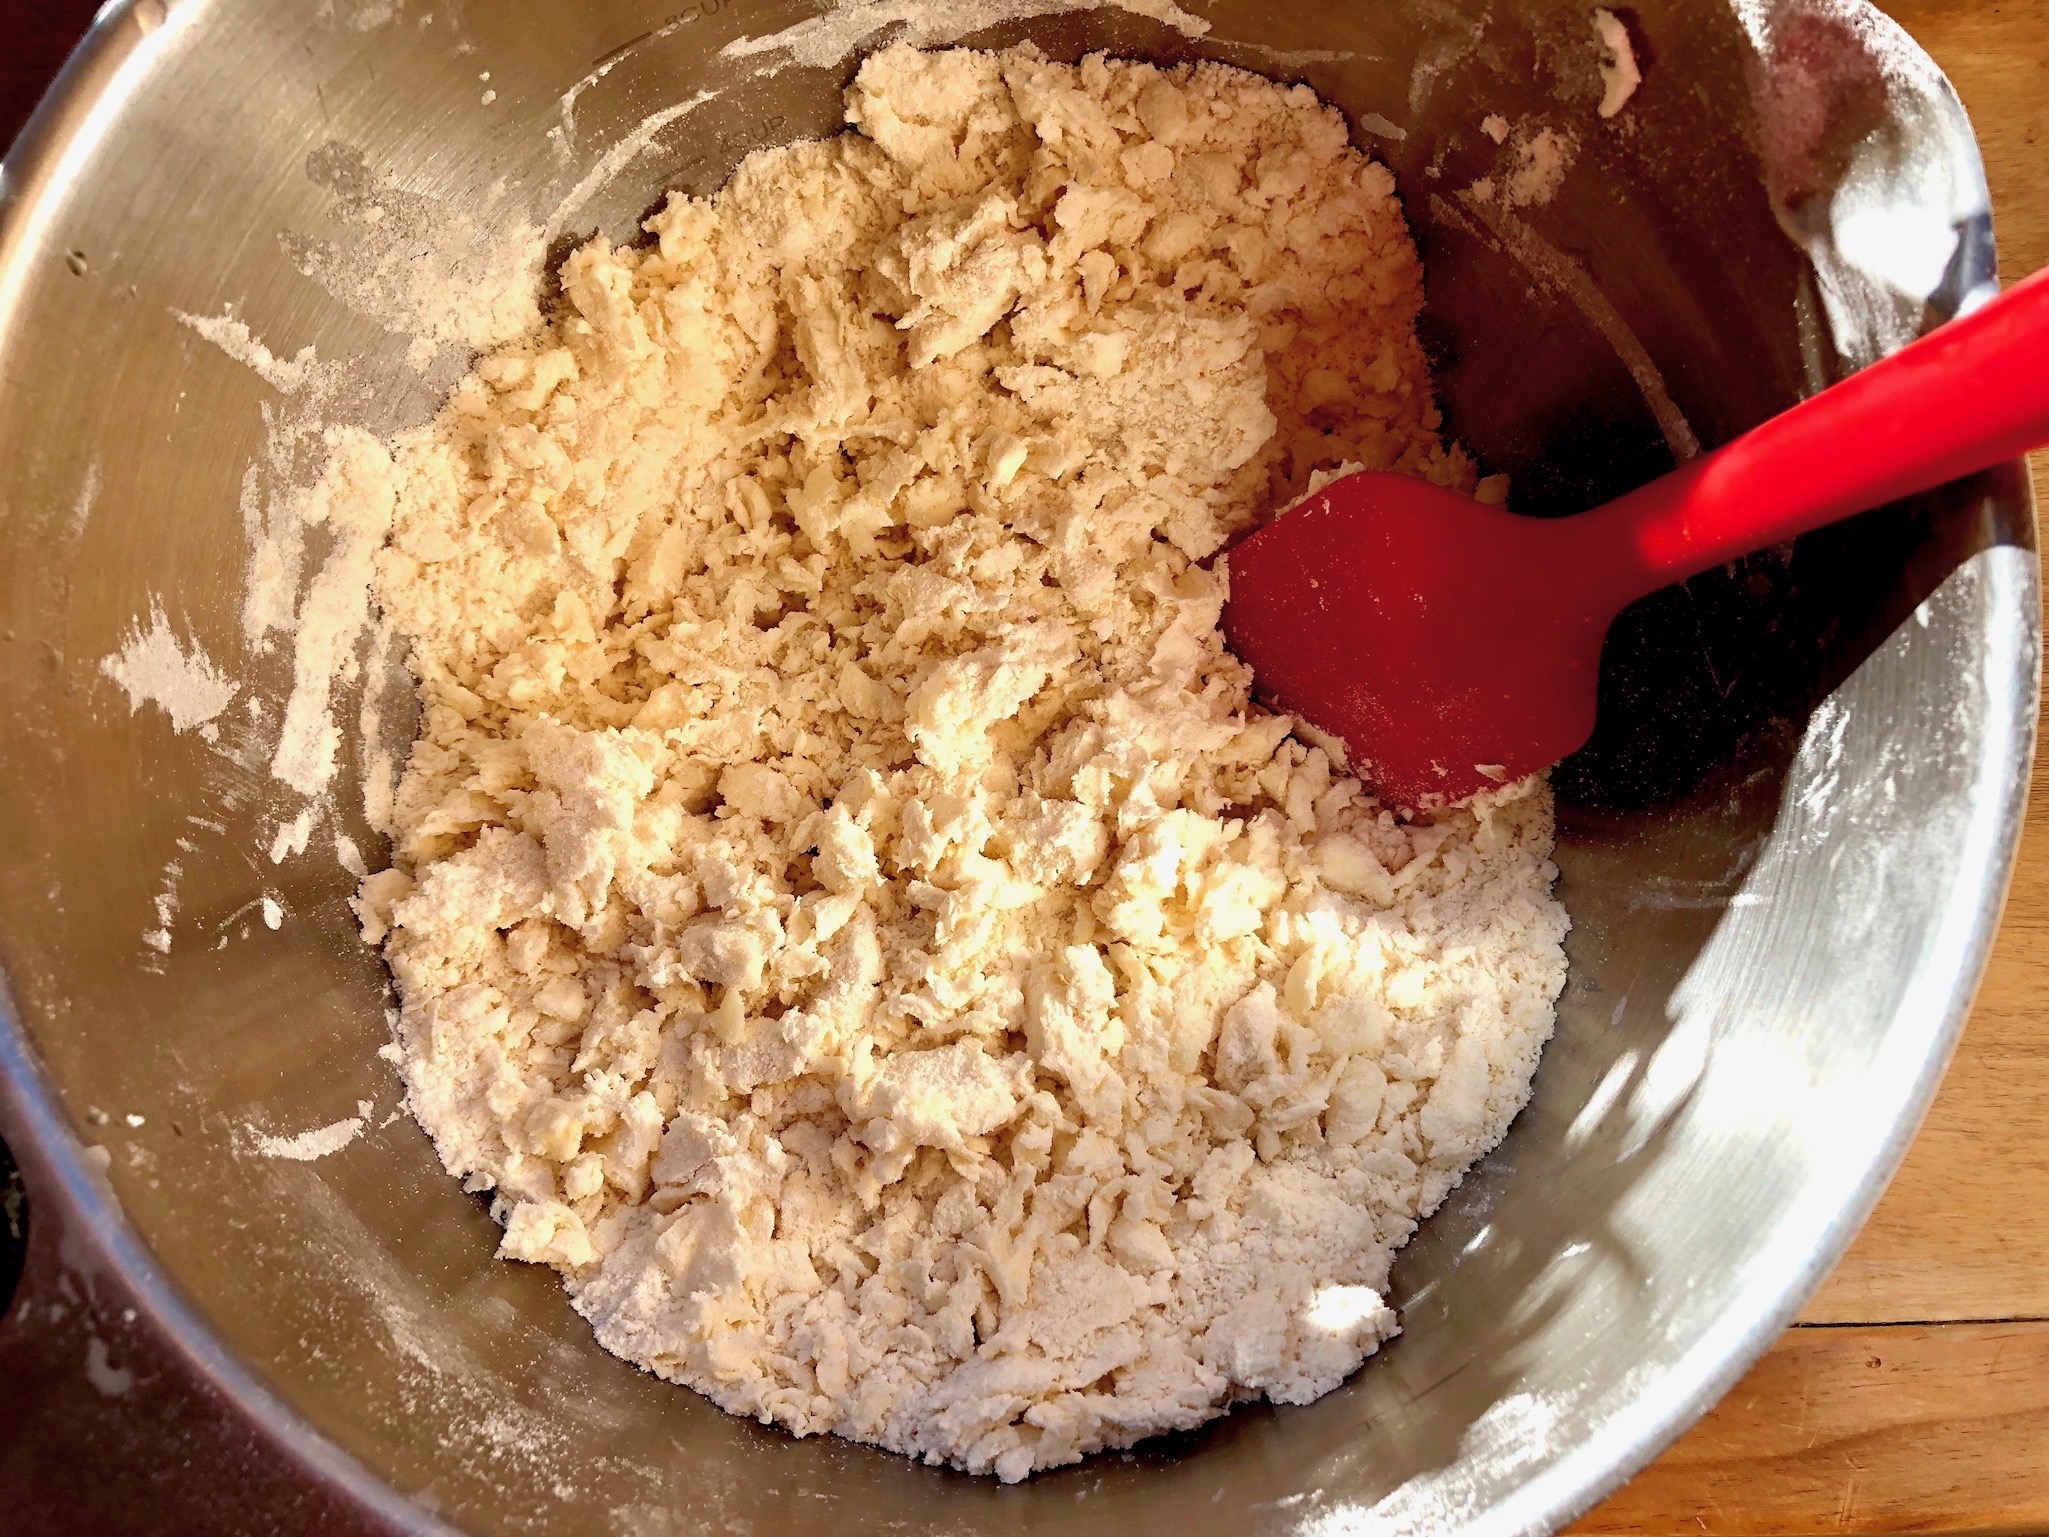 mix until dough begins to hold together